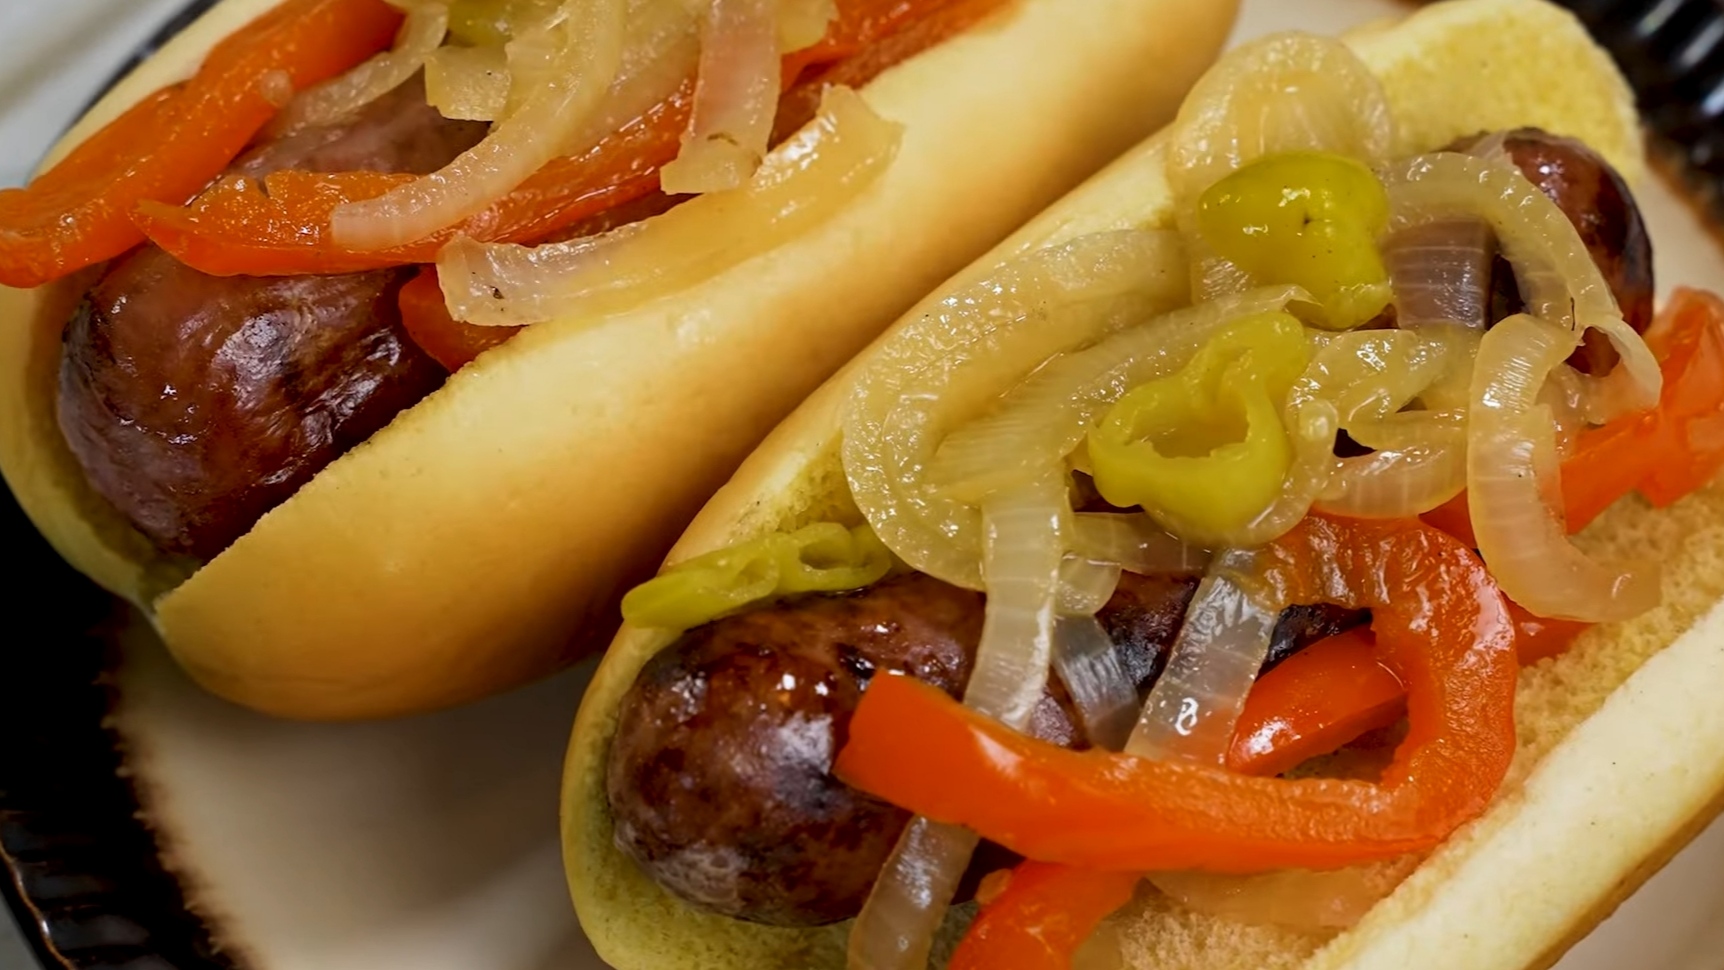 https://recipes.net/wp-content/uploads/2022/04/Beer-Brats-Hot-Tub-with-Dill-Pickle-Relish.jpg